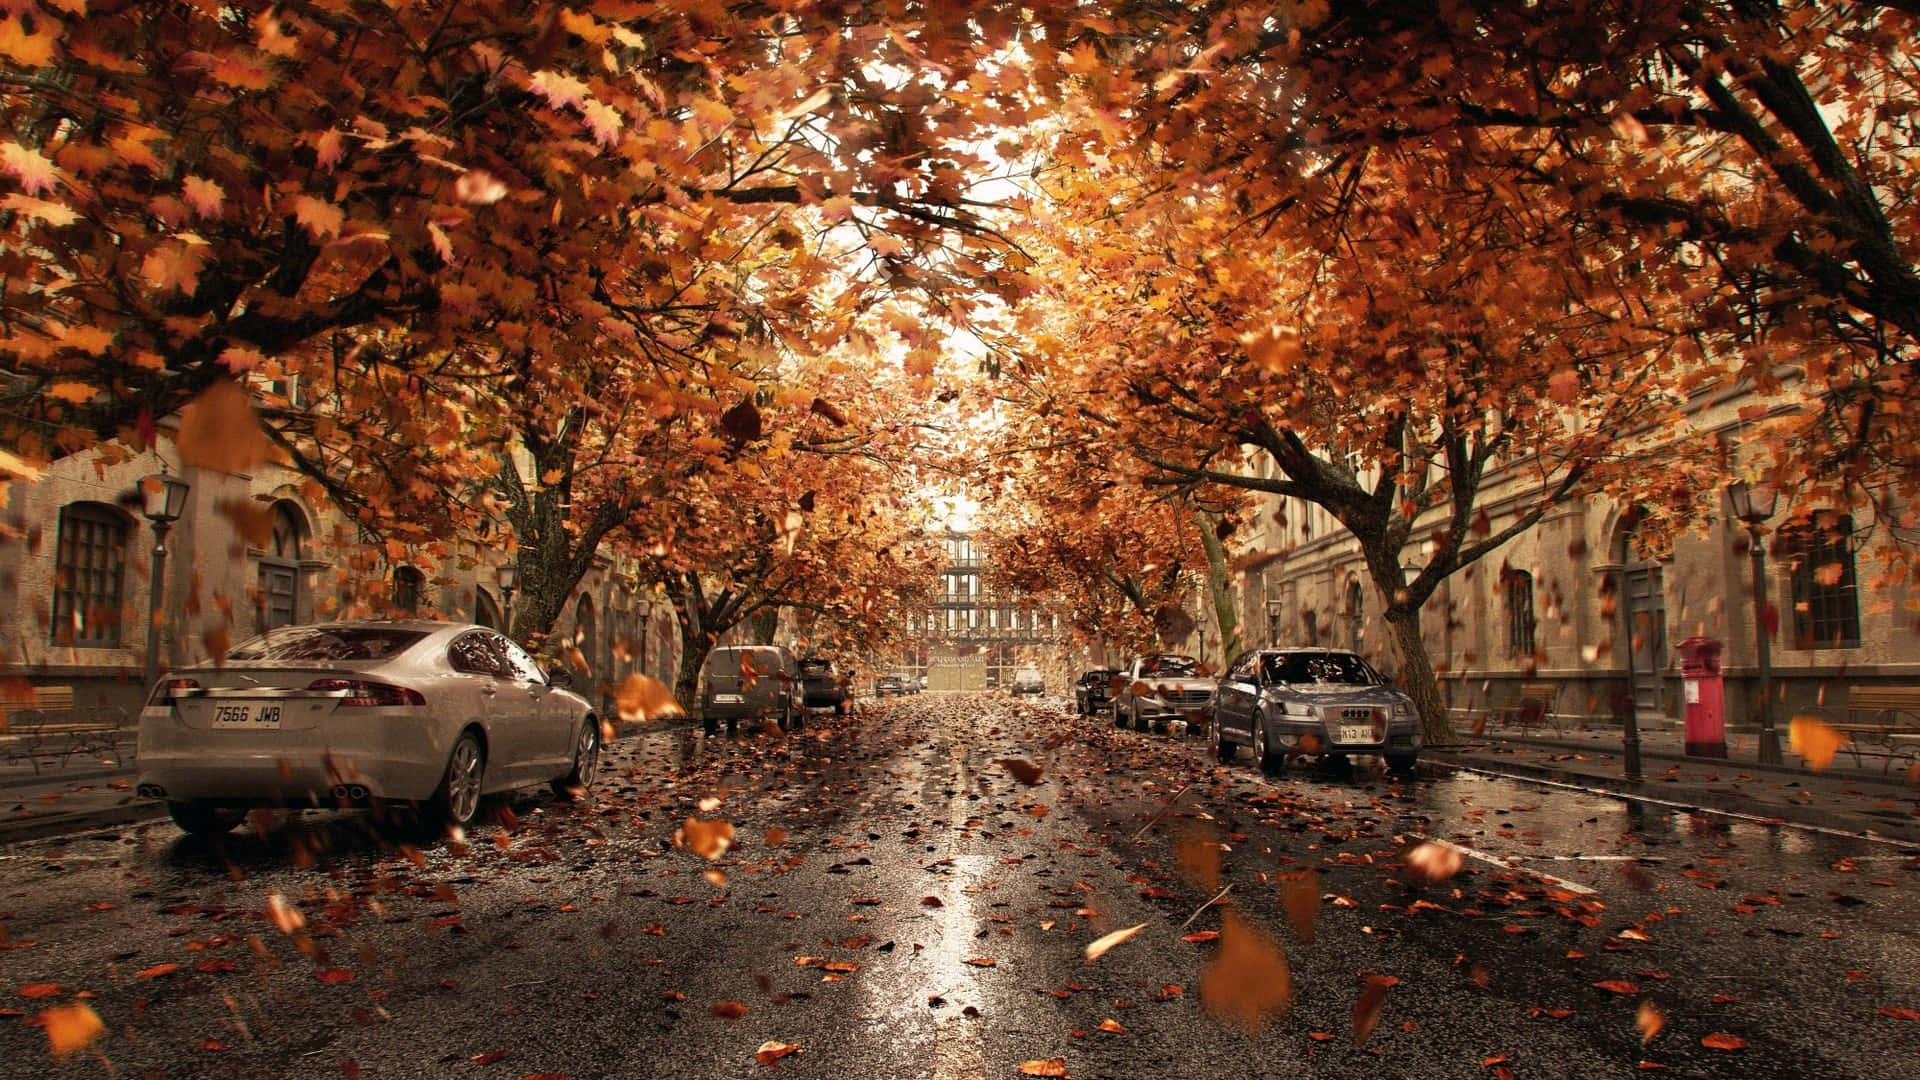 Fall Town Scenery - A picturesque view of a quaint town during autumn. Wallpaper